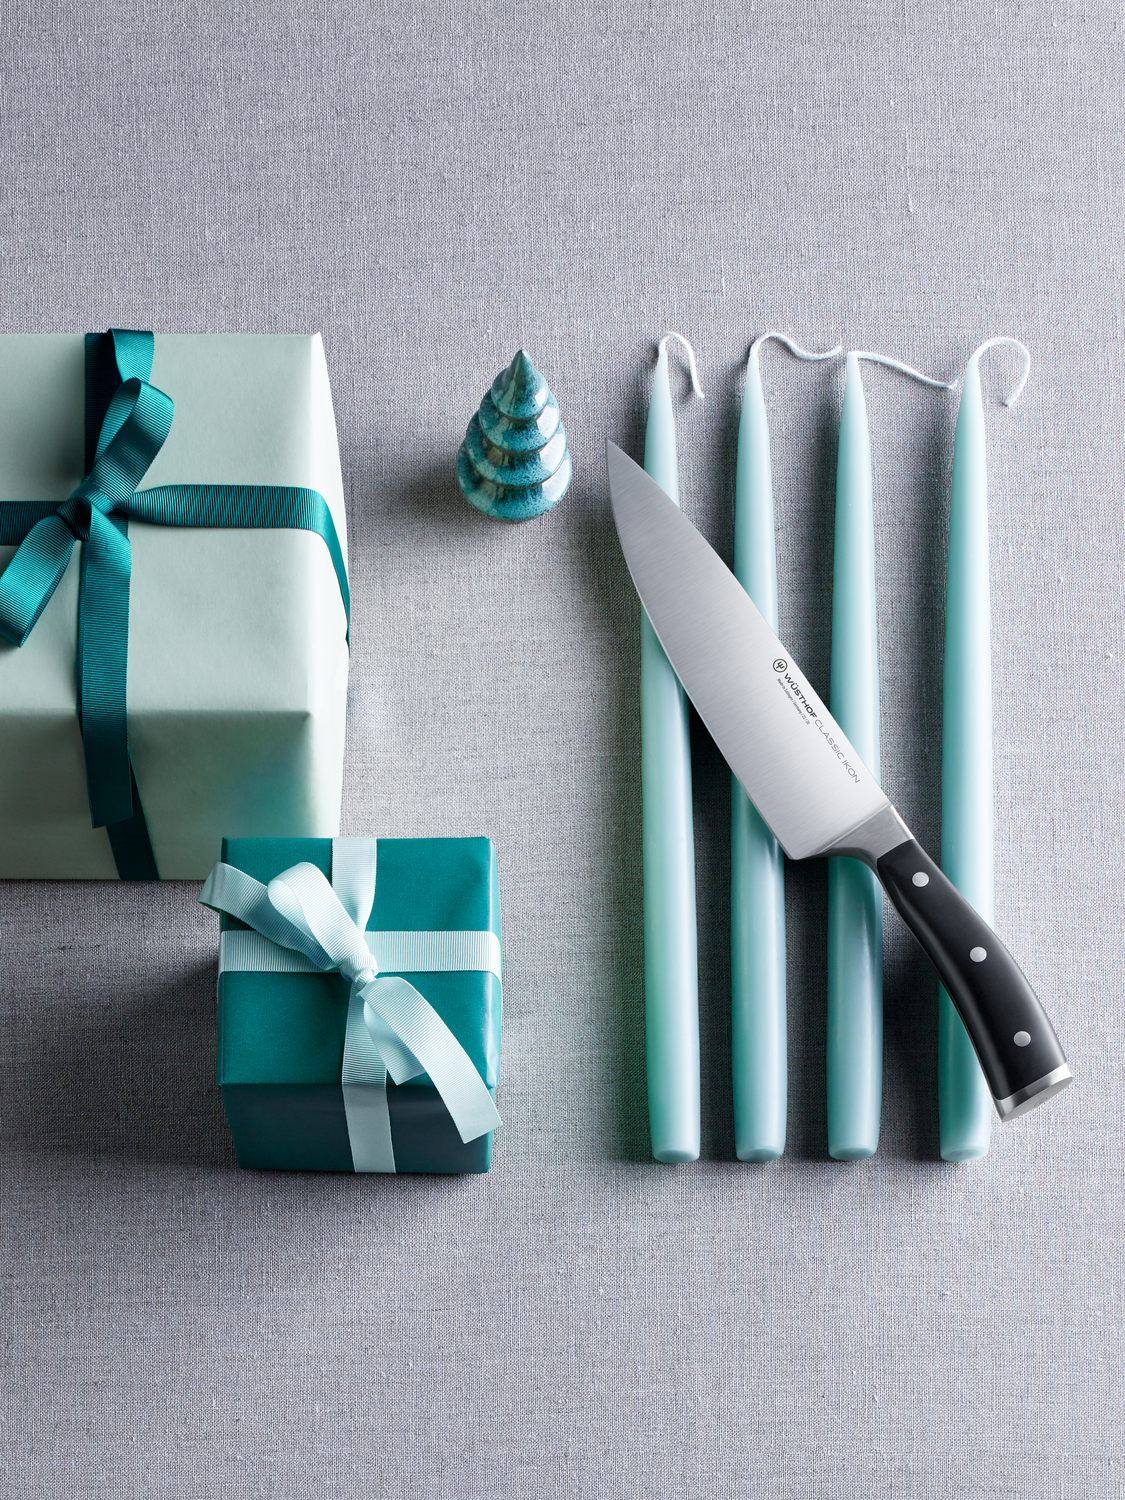 Classic Ikon Chef's Knife surrounded by presents